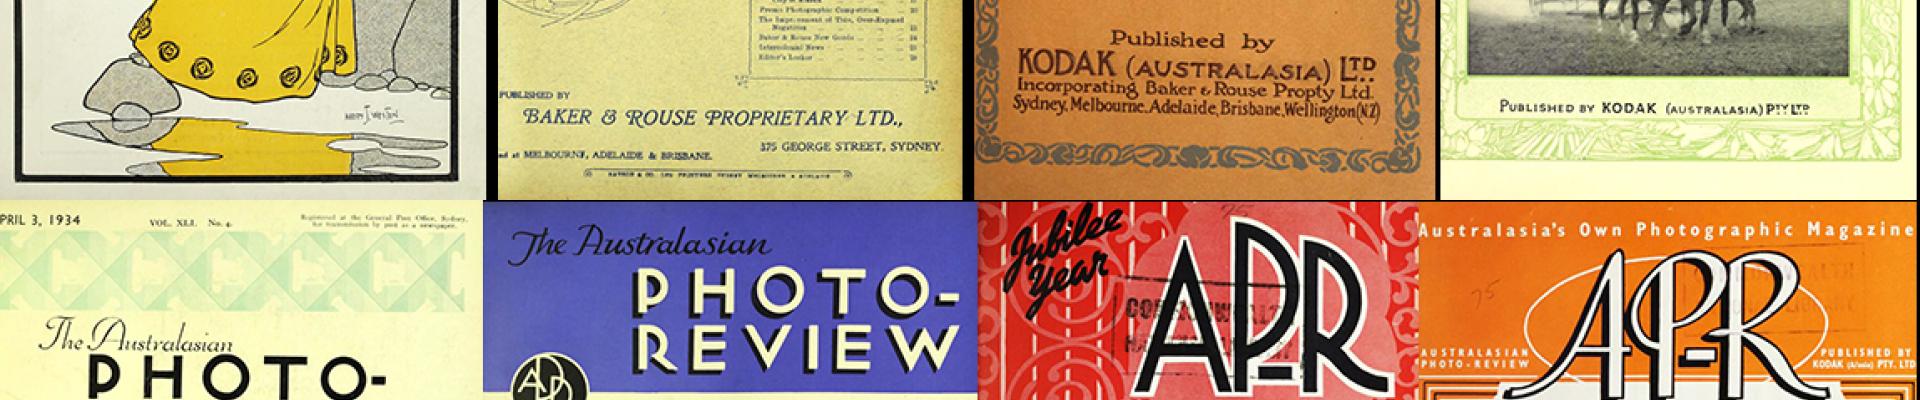 Australasian Photo Review Journal Covers